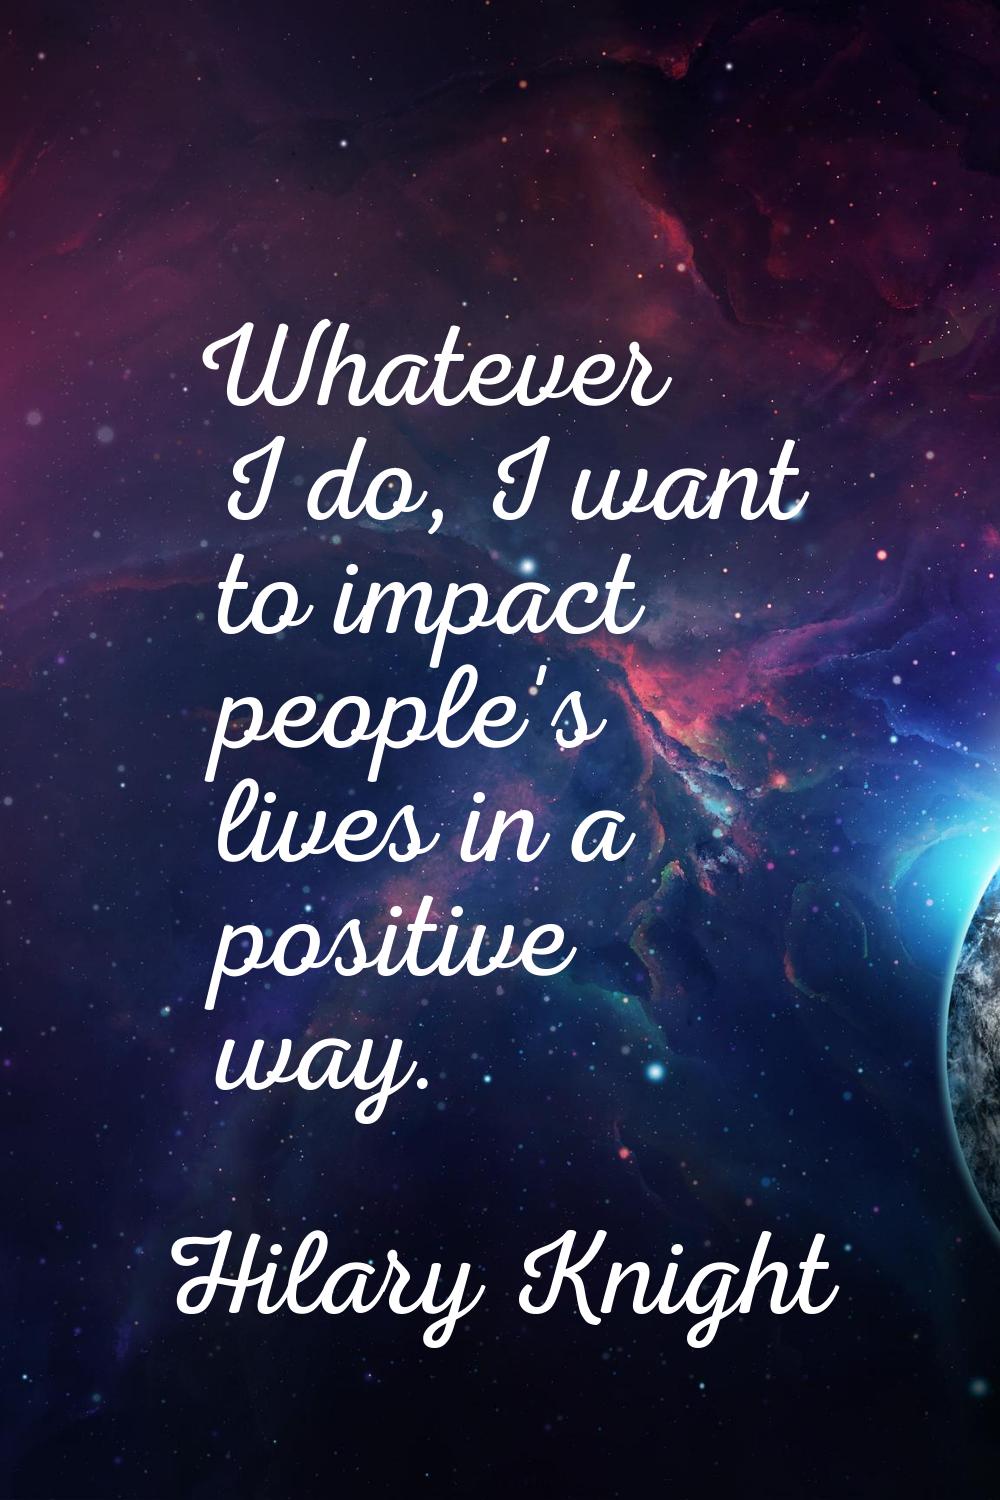 Whatever I do, I want to impact people's lives in a positive way.